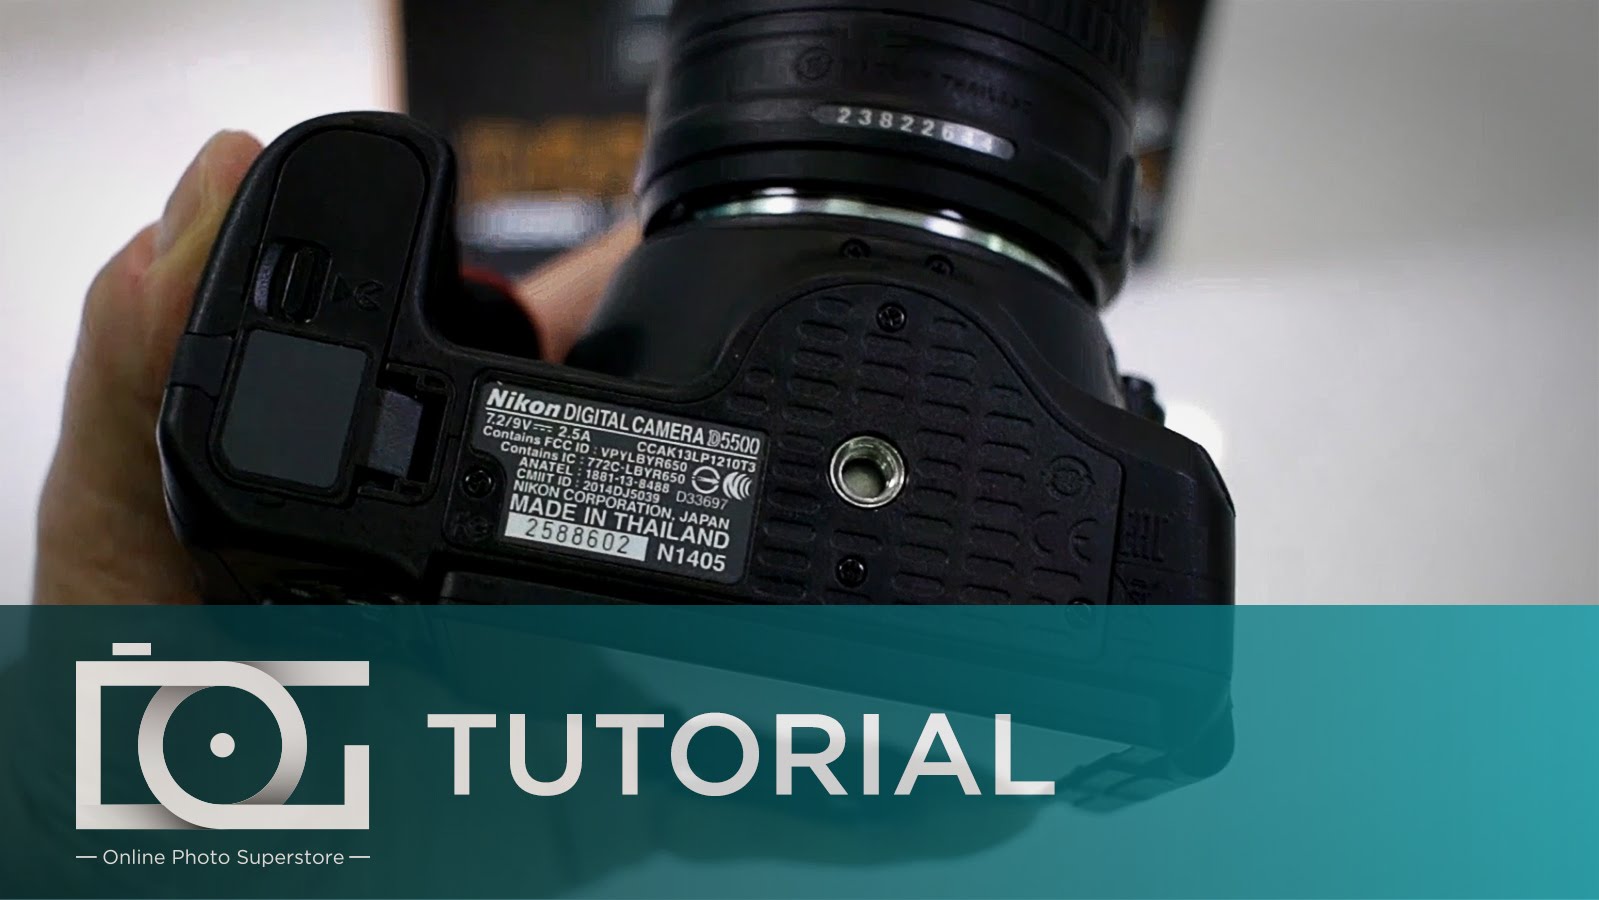 NIKON D5500 TUTORIAL | Where Is This Camera Manufactured?